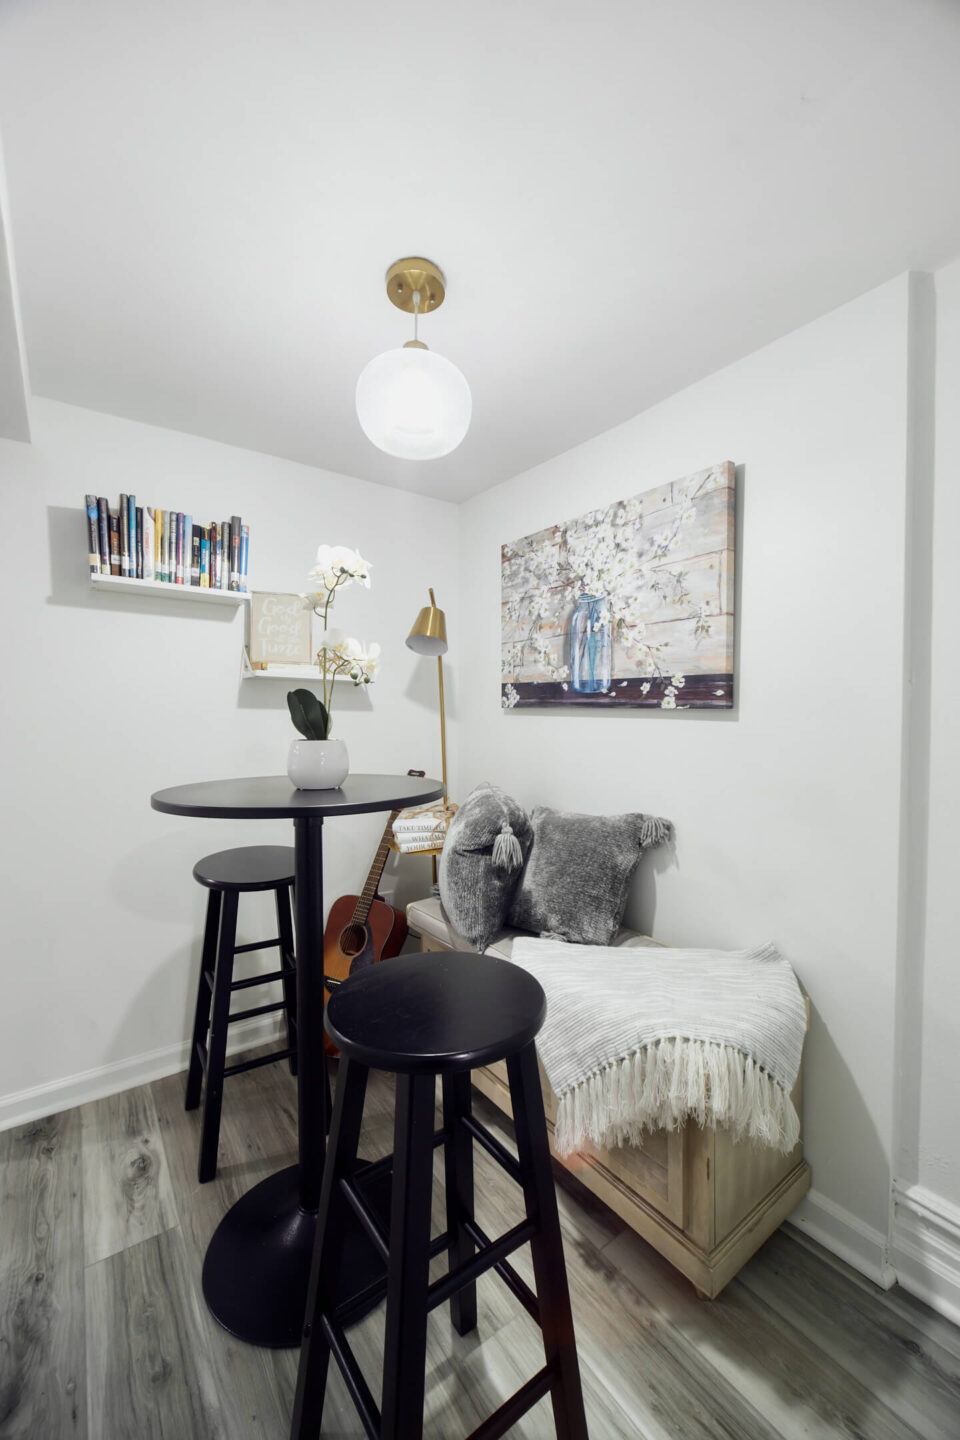 32-34 85th St, East Elmhurst, NY 11370 - Real Estate, AirBnb Photography